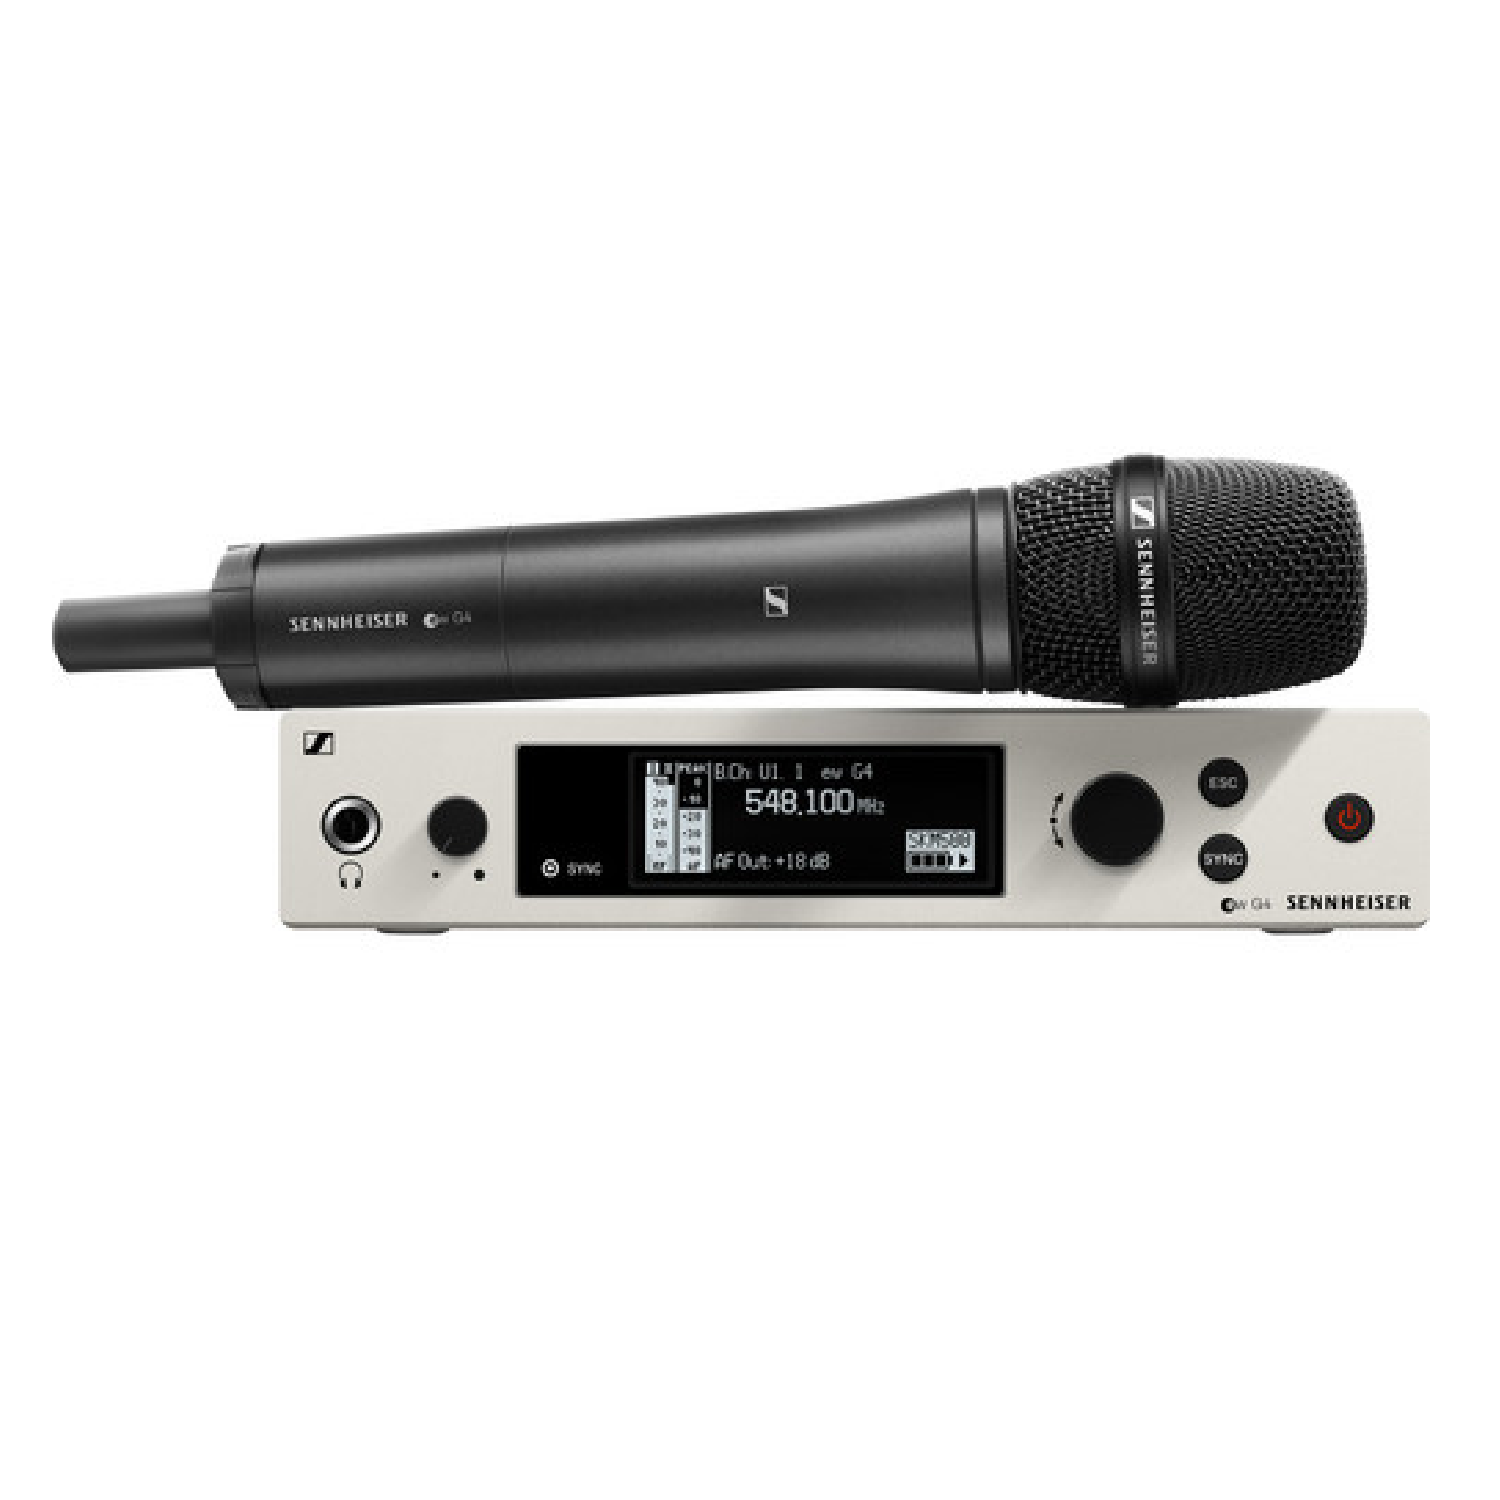 Wireless Handheld Microphone System with MMD 945 Capsule - Cw: 470 - 558 MHz   EW 500 G4 945 Cw sennheiser